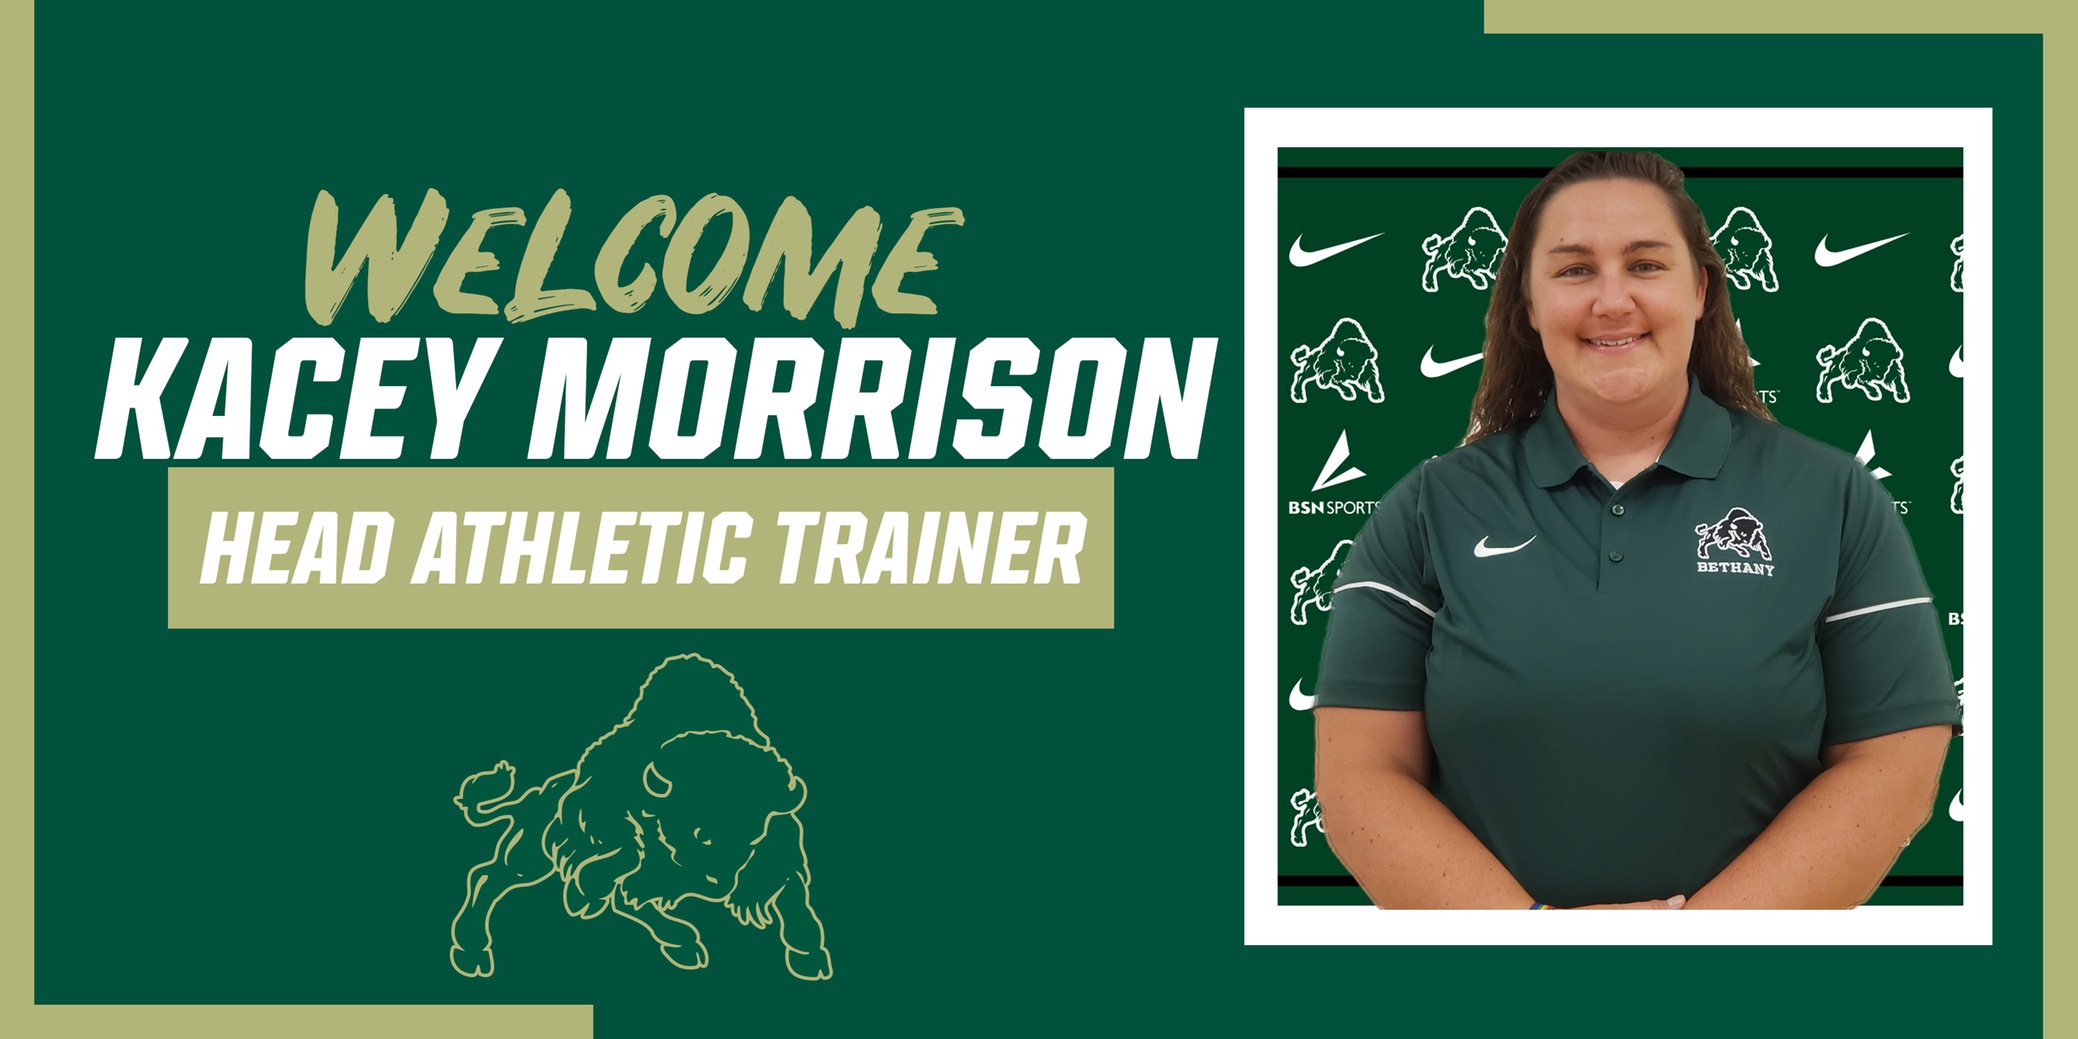 Morrison Joins Bethany College at Head Athletic Trainer